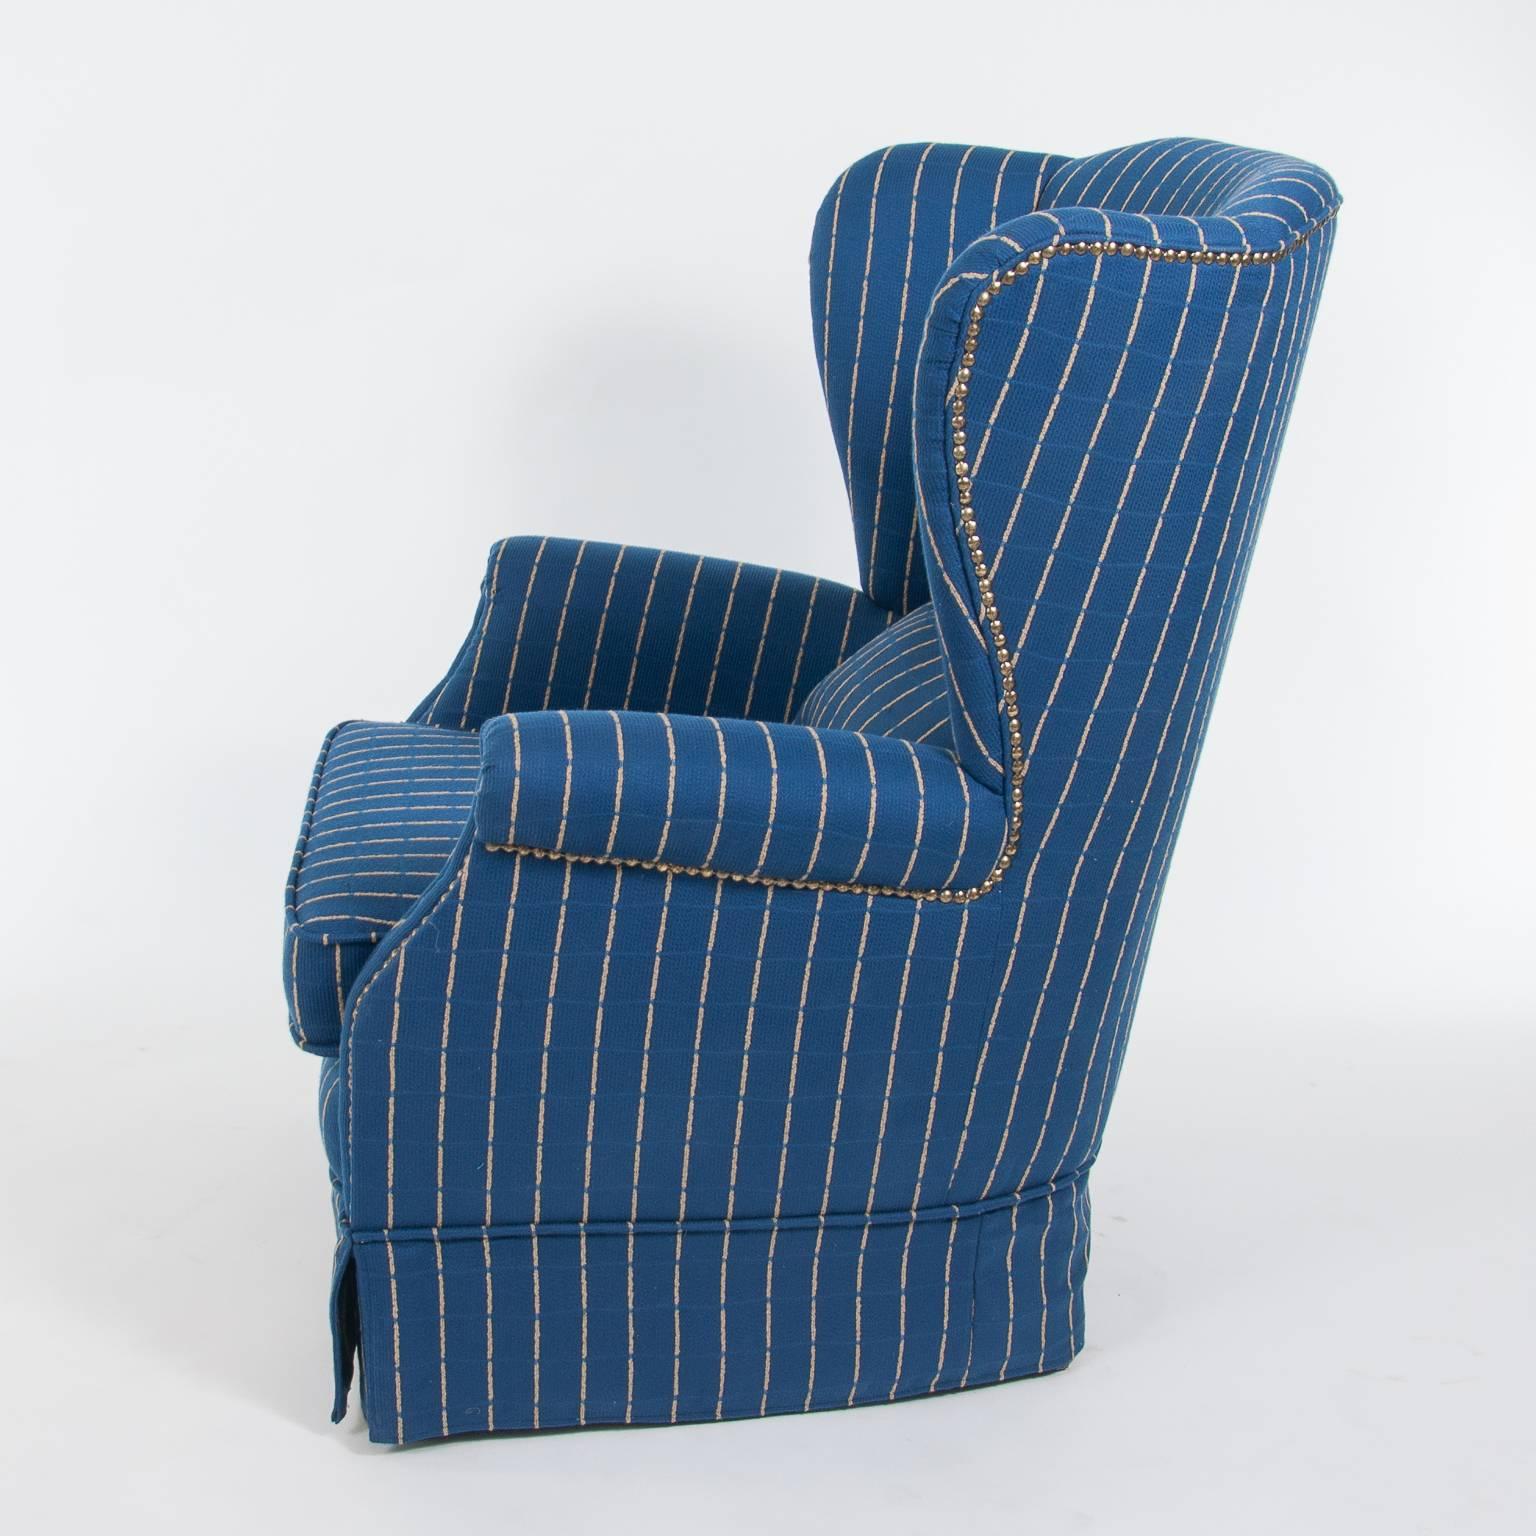 Tufted wingback chair with ottoman. A high-quality blue skirted upholstery from the well-known Austrian Company Backhausen with accented piping.
The ultimate in luxury and comfort. Great for bedroom or dressing room.

The chair and the ottoman are